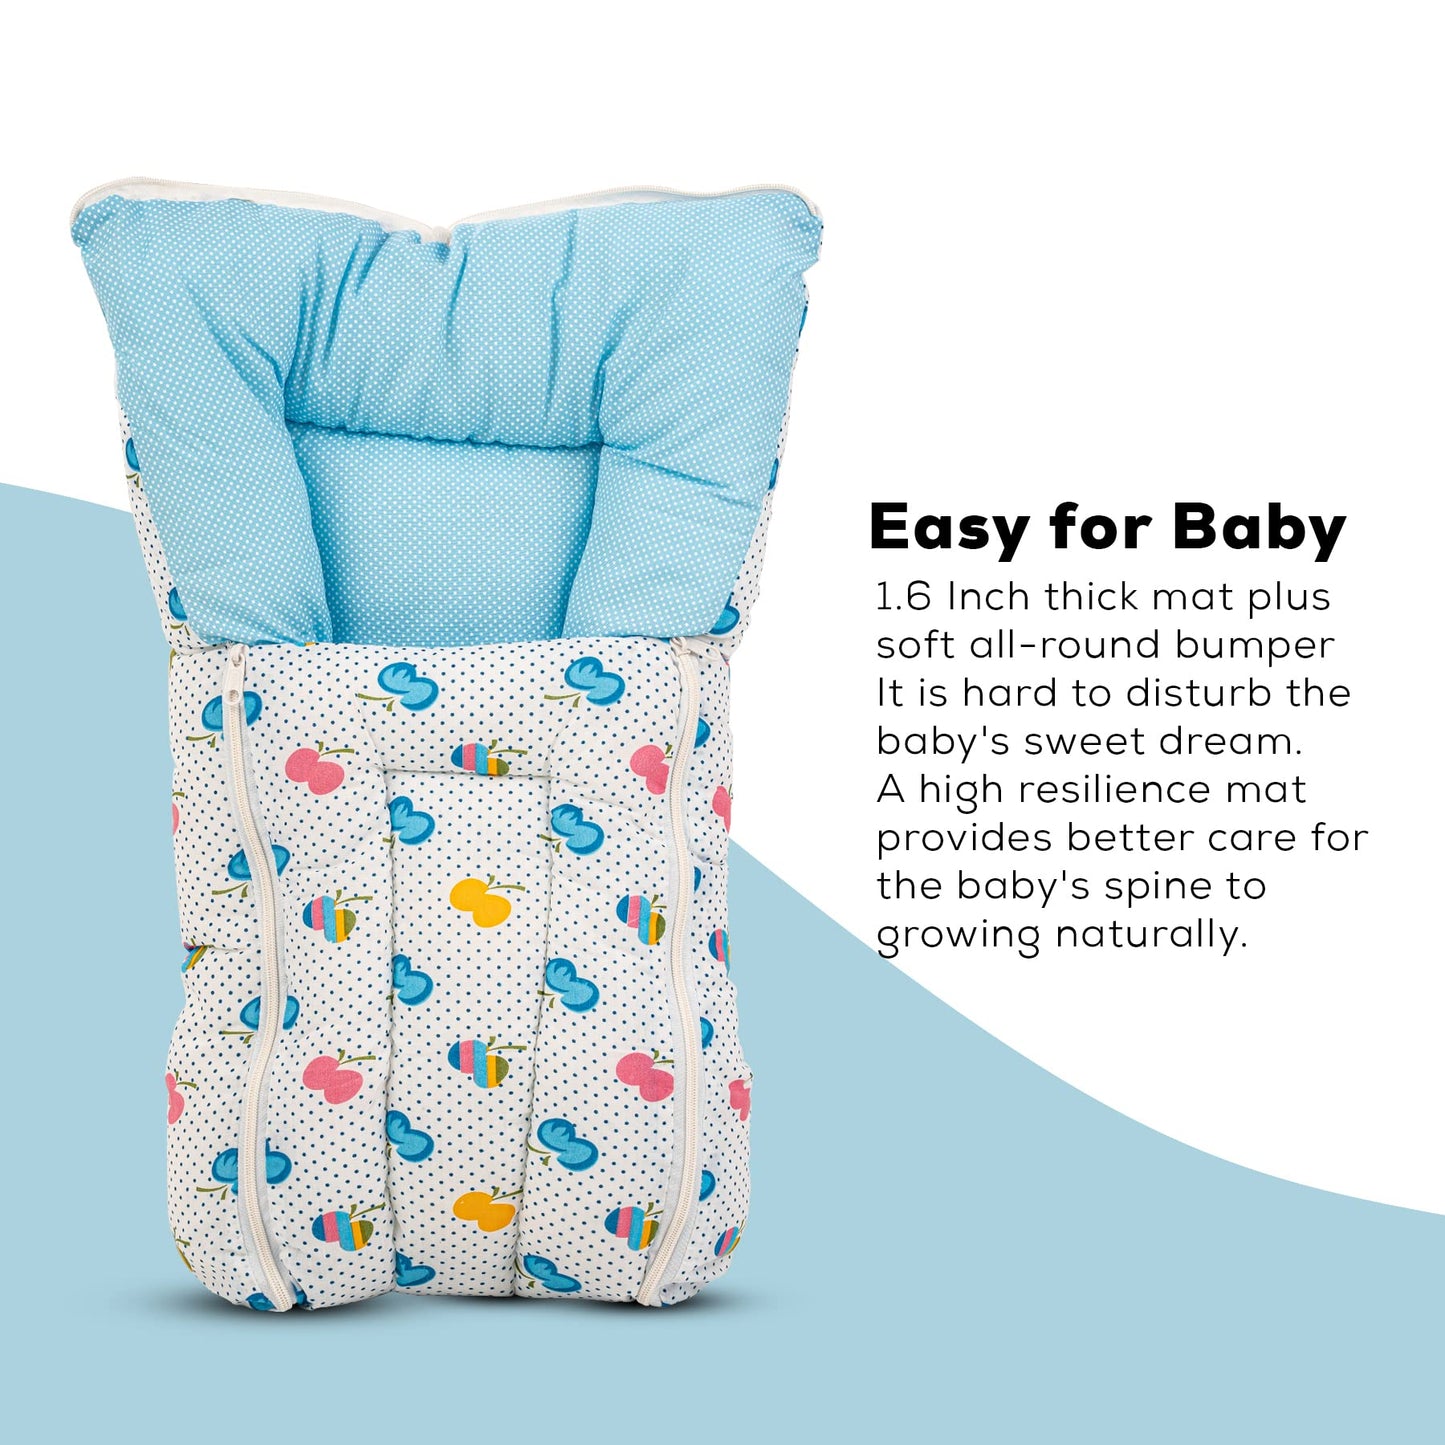 BAYBEE Baby Cotton Printed Sleeping Cum Carry Bag for New Born